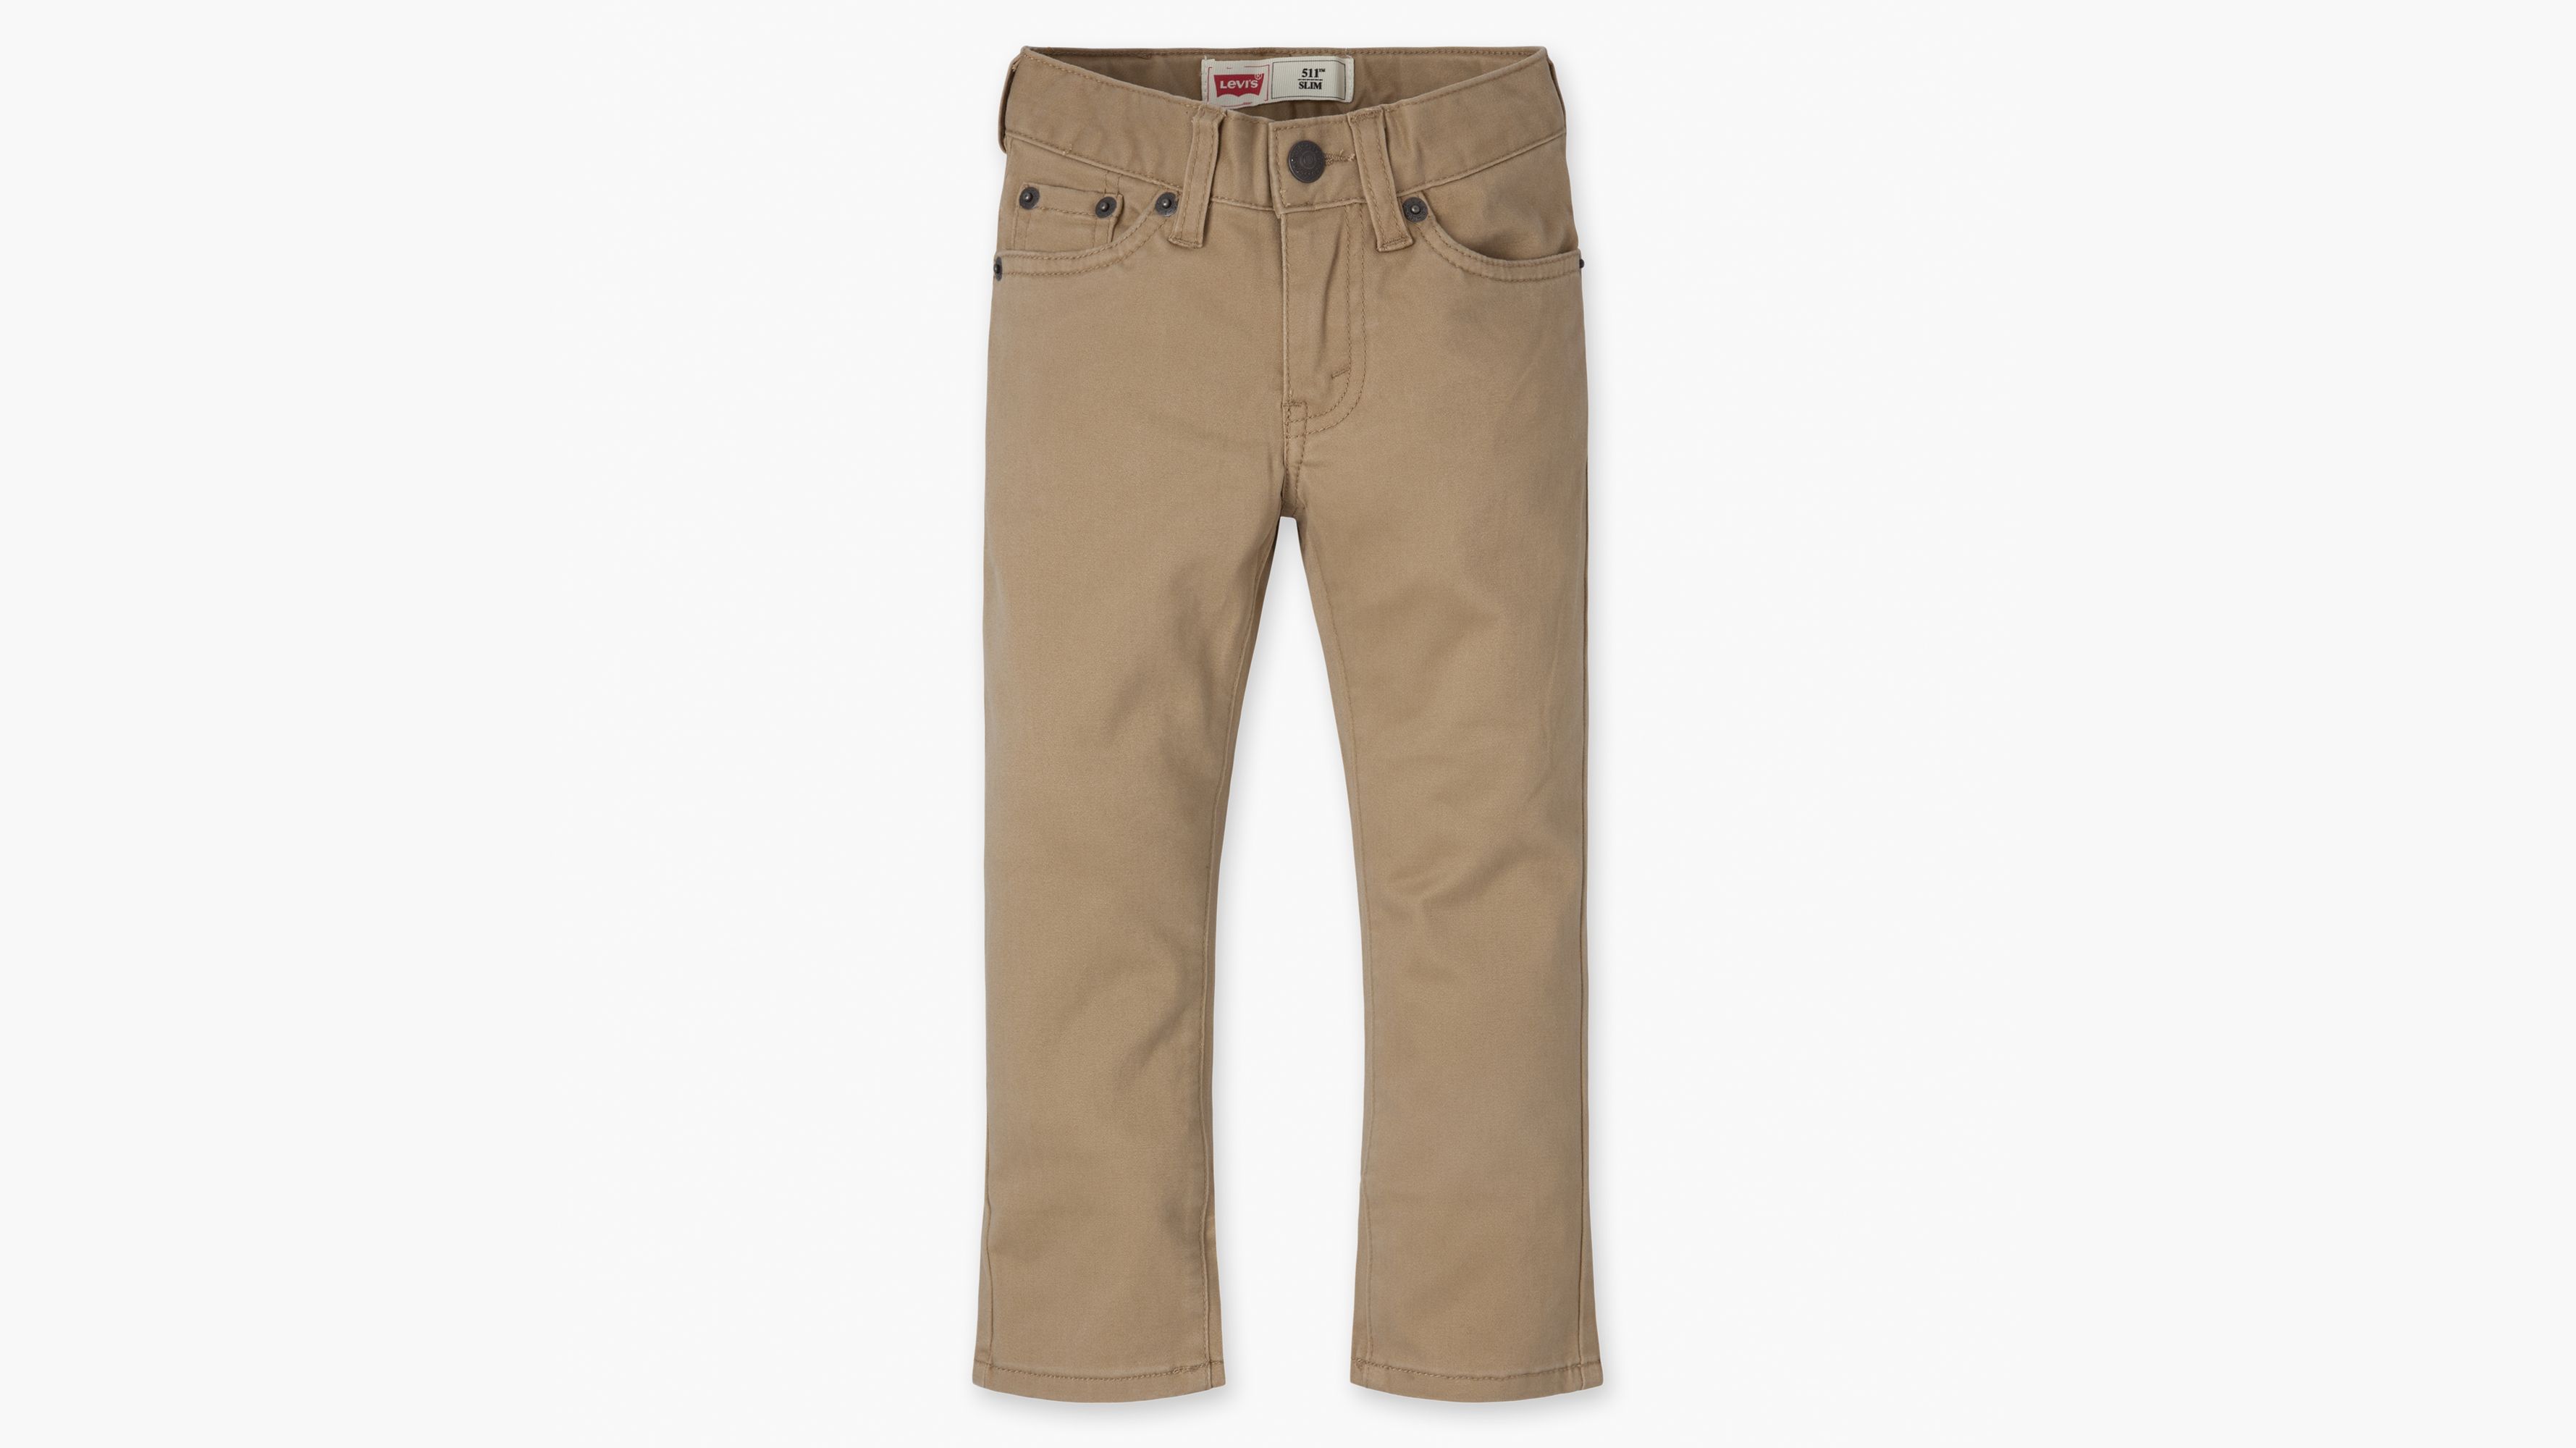 khaki pants for toddlers